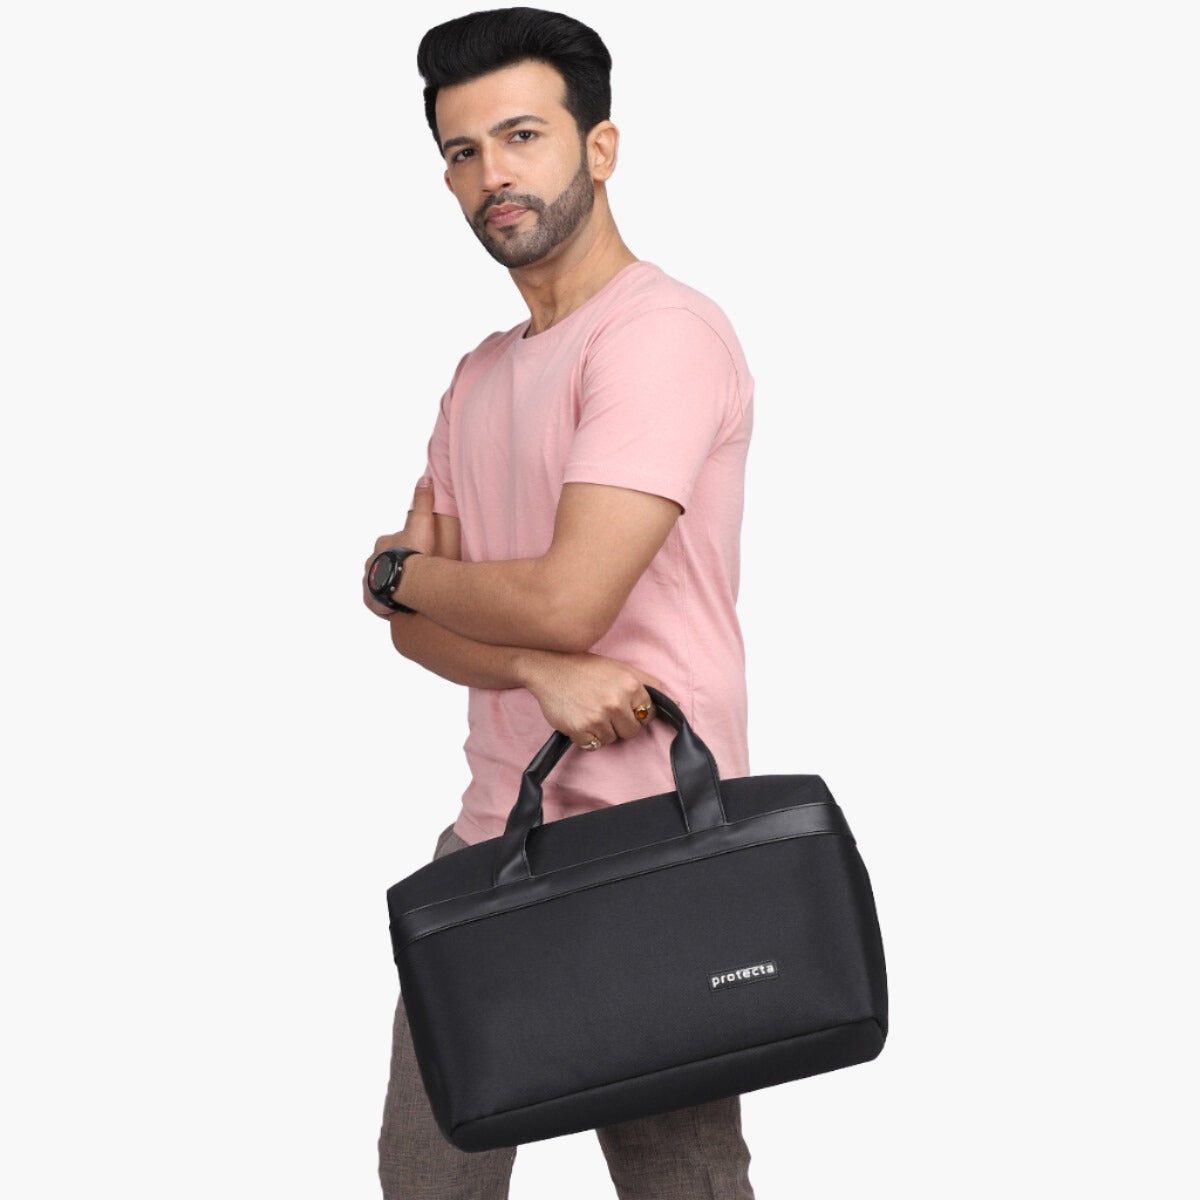 Black | Protecta Early Lead Anti-Theft Office Laptop Bag - 5